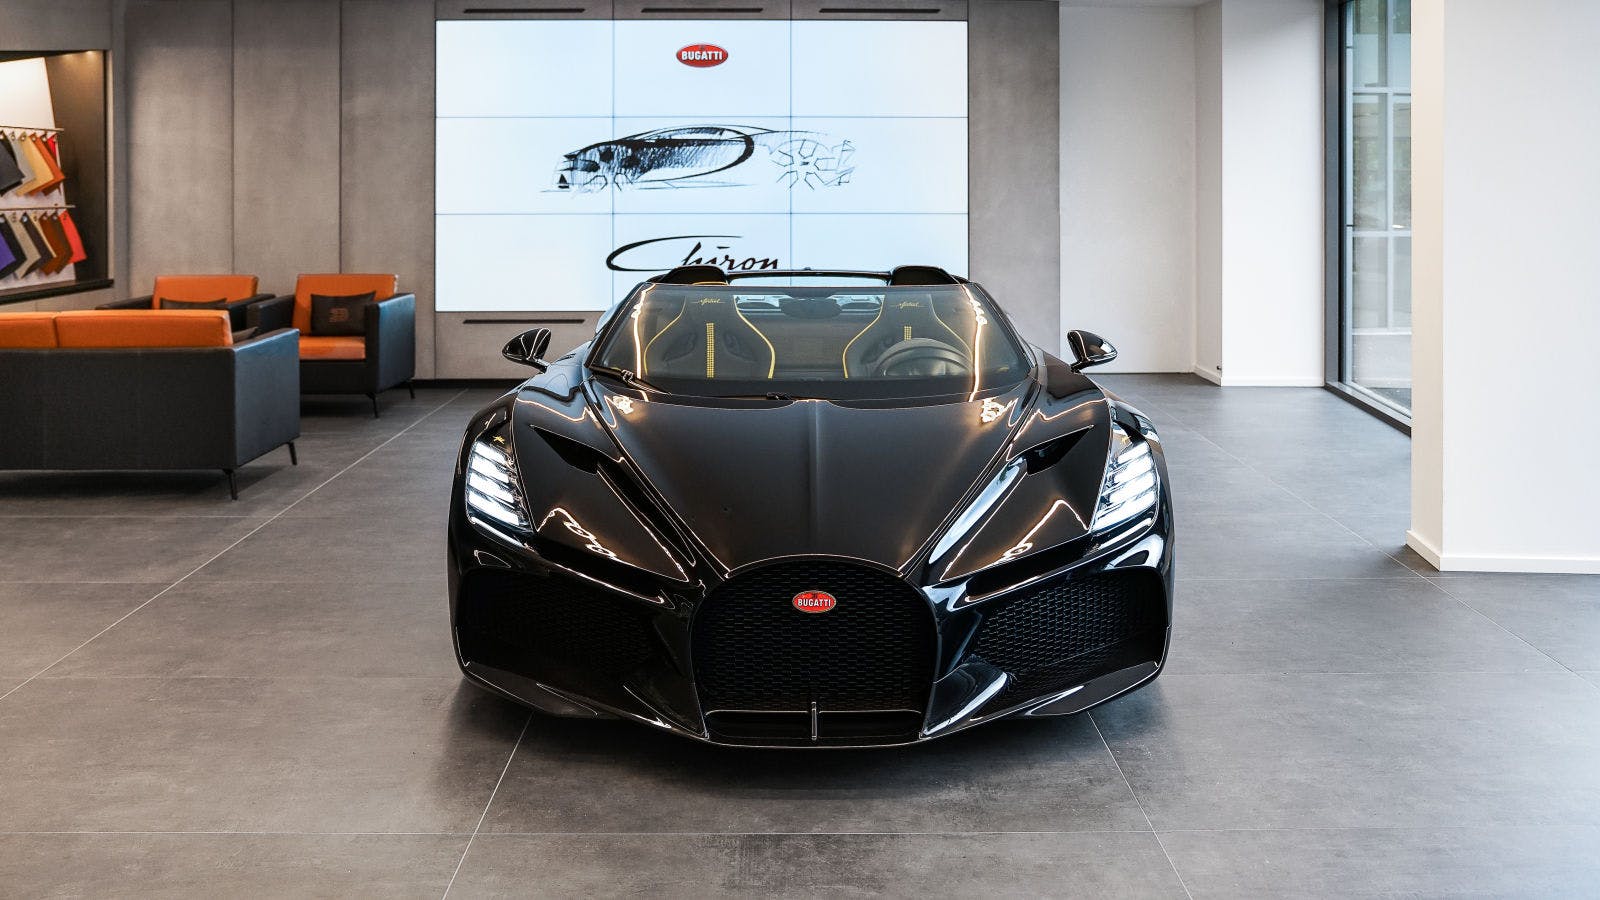 In Hamburg, the W16 Mistral was on display for the first time at a Bugatti retailer in Europe.